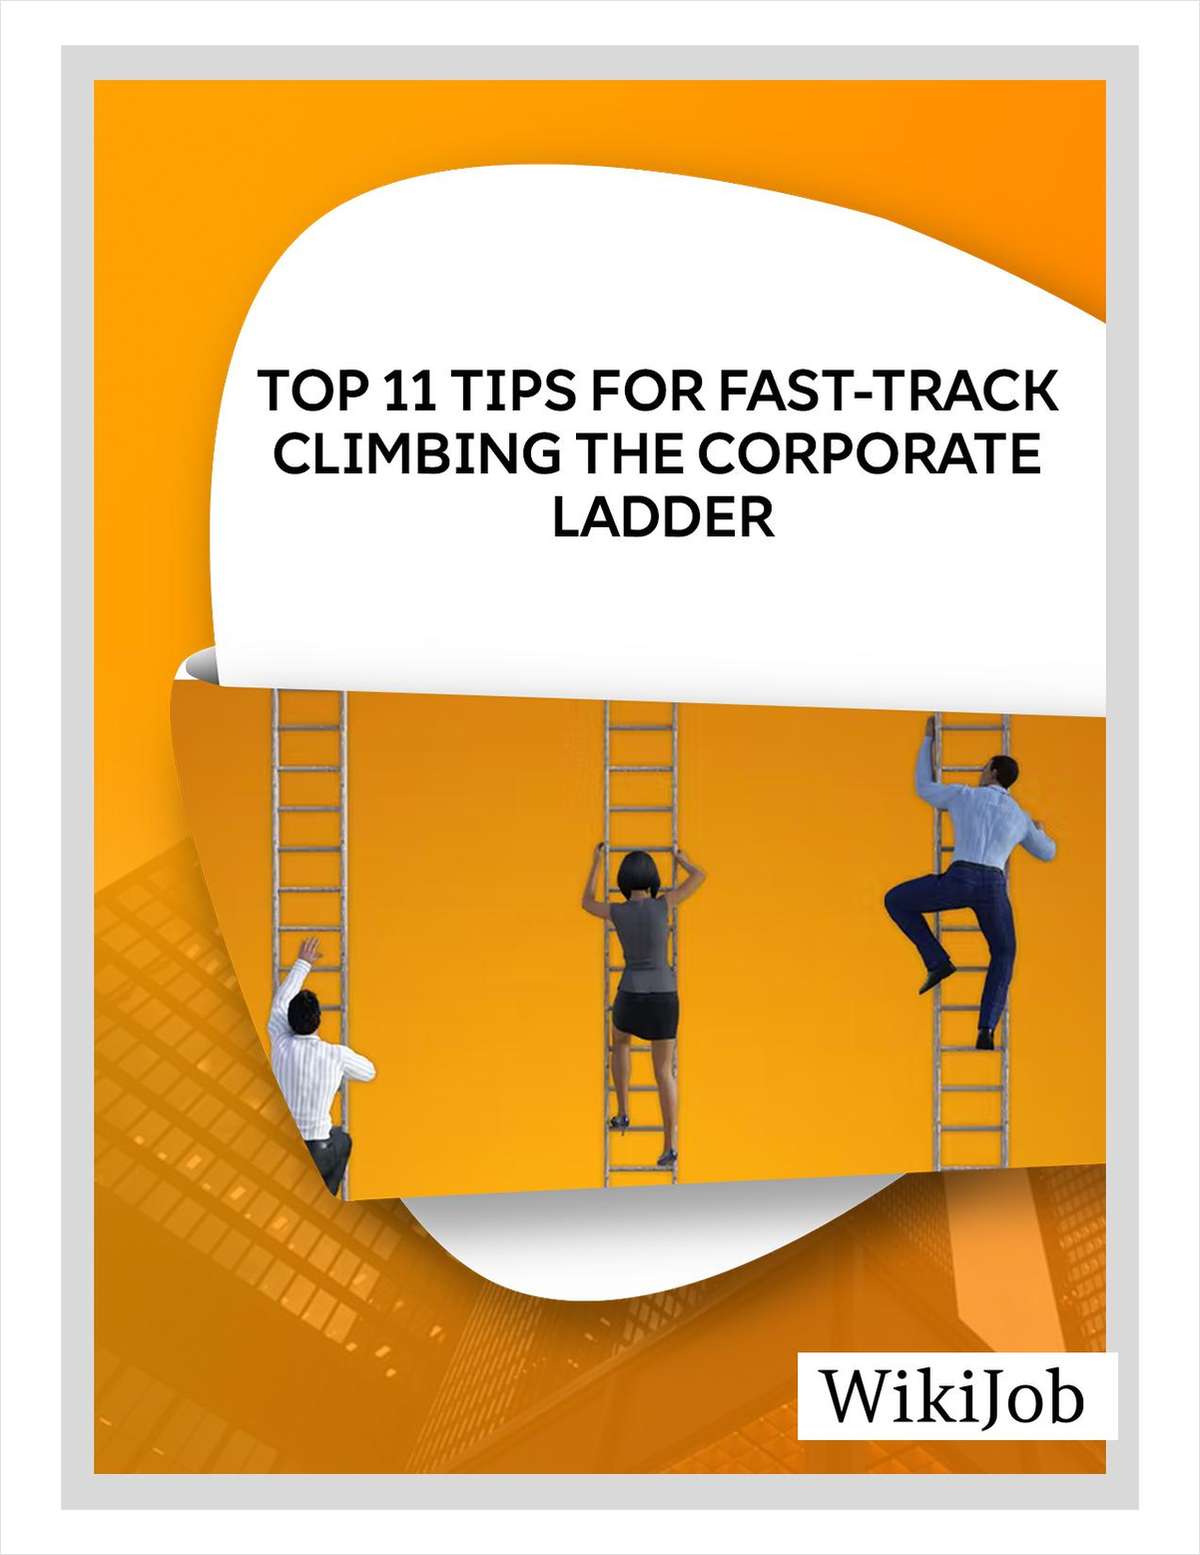 Top 11 Tips for Fast-Track Climbing the Corporate Ladde